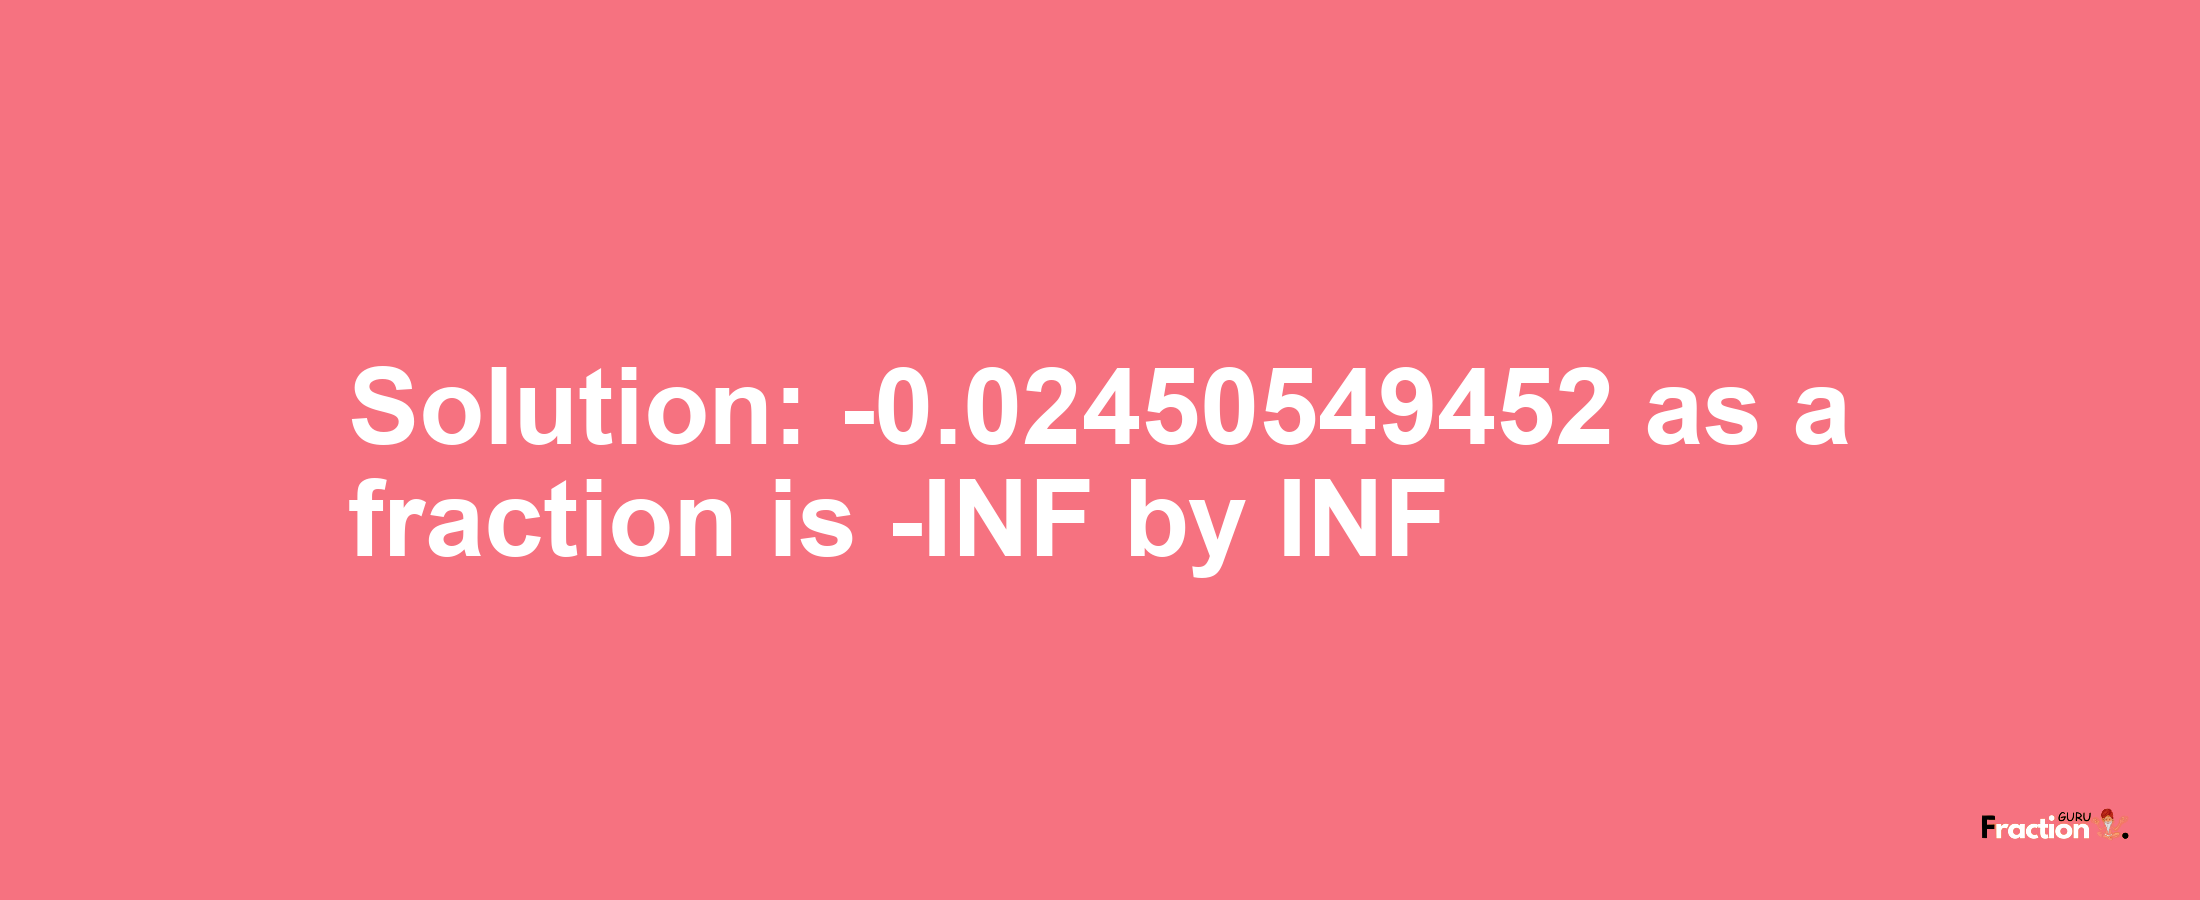 Solution:-0.02450549452 as a fraction is -INF/INF